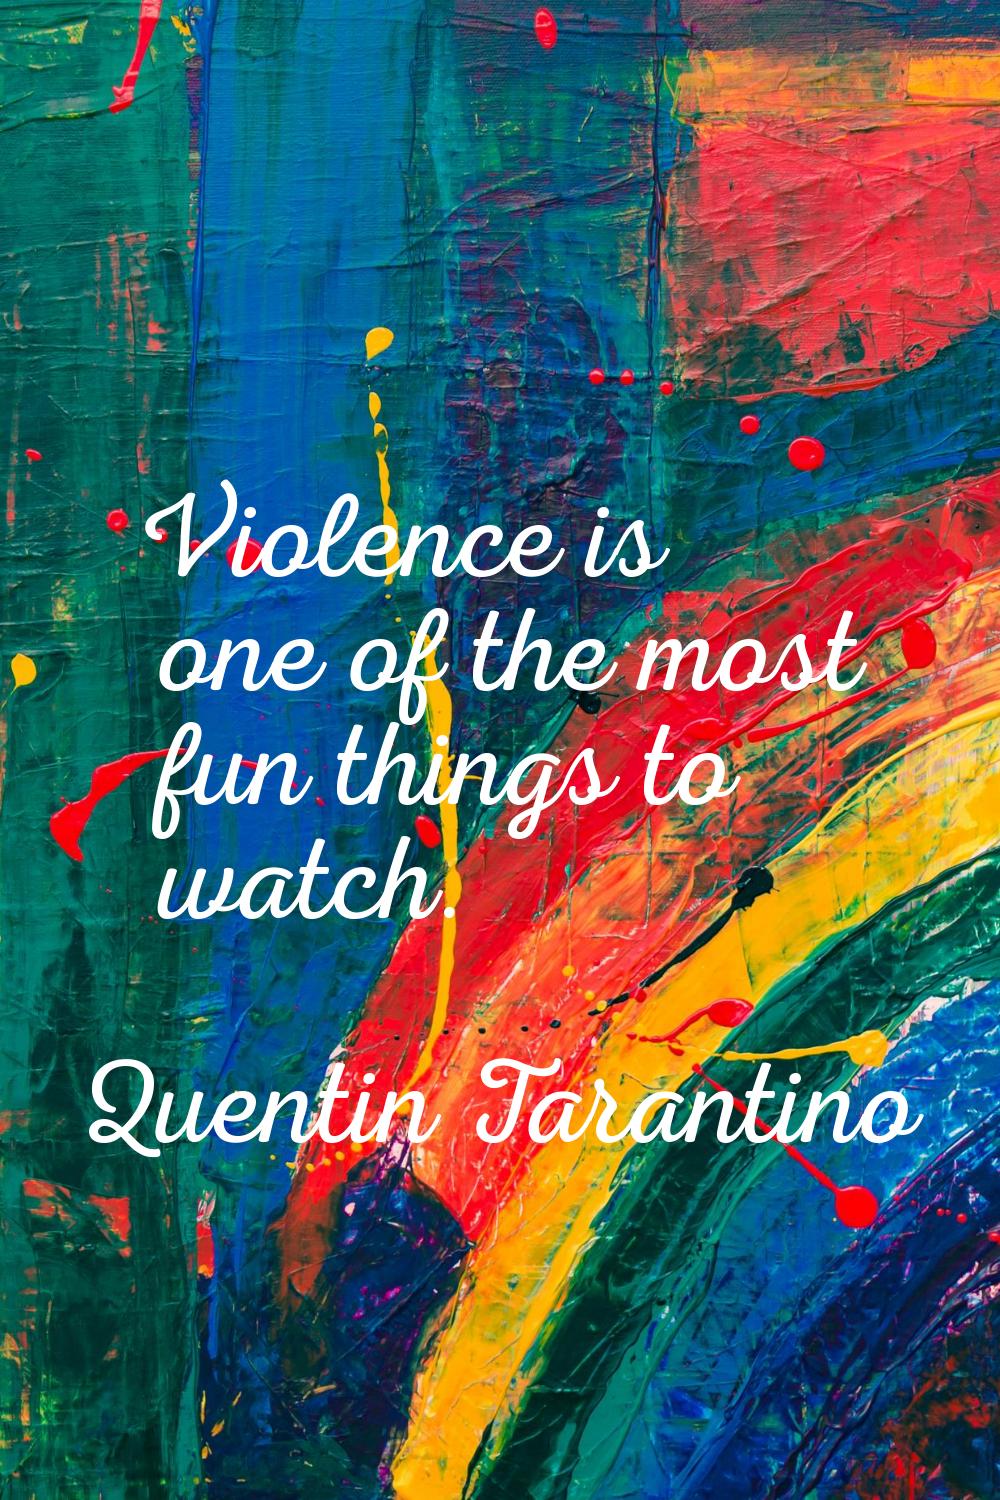 Violence is one of the most fun things to watch.